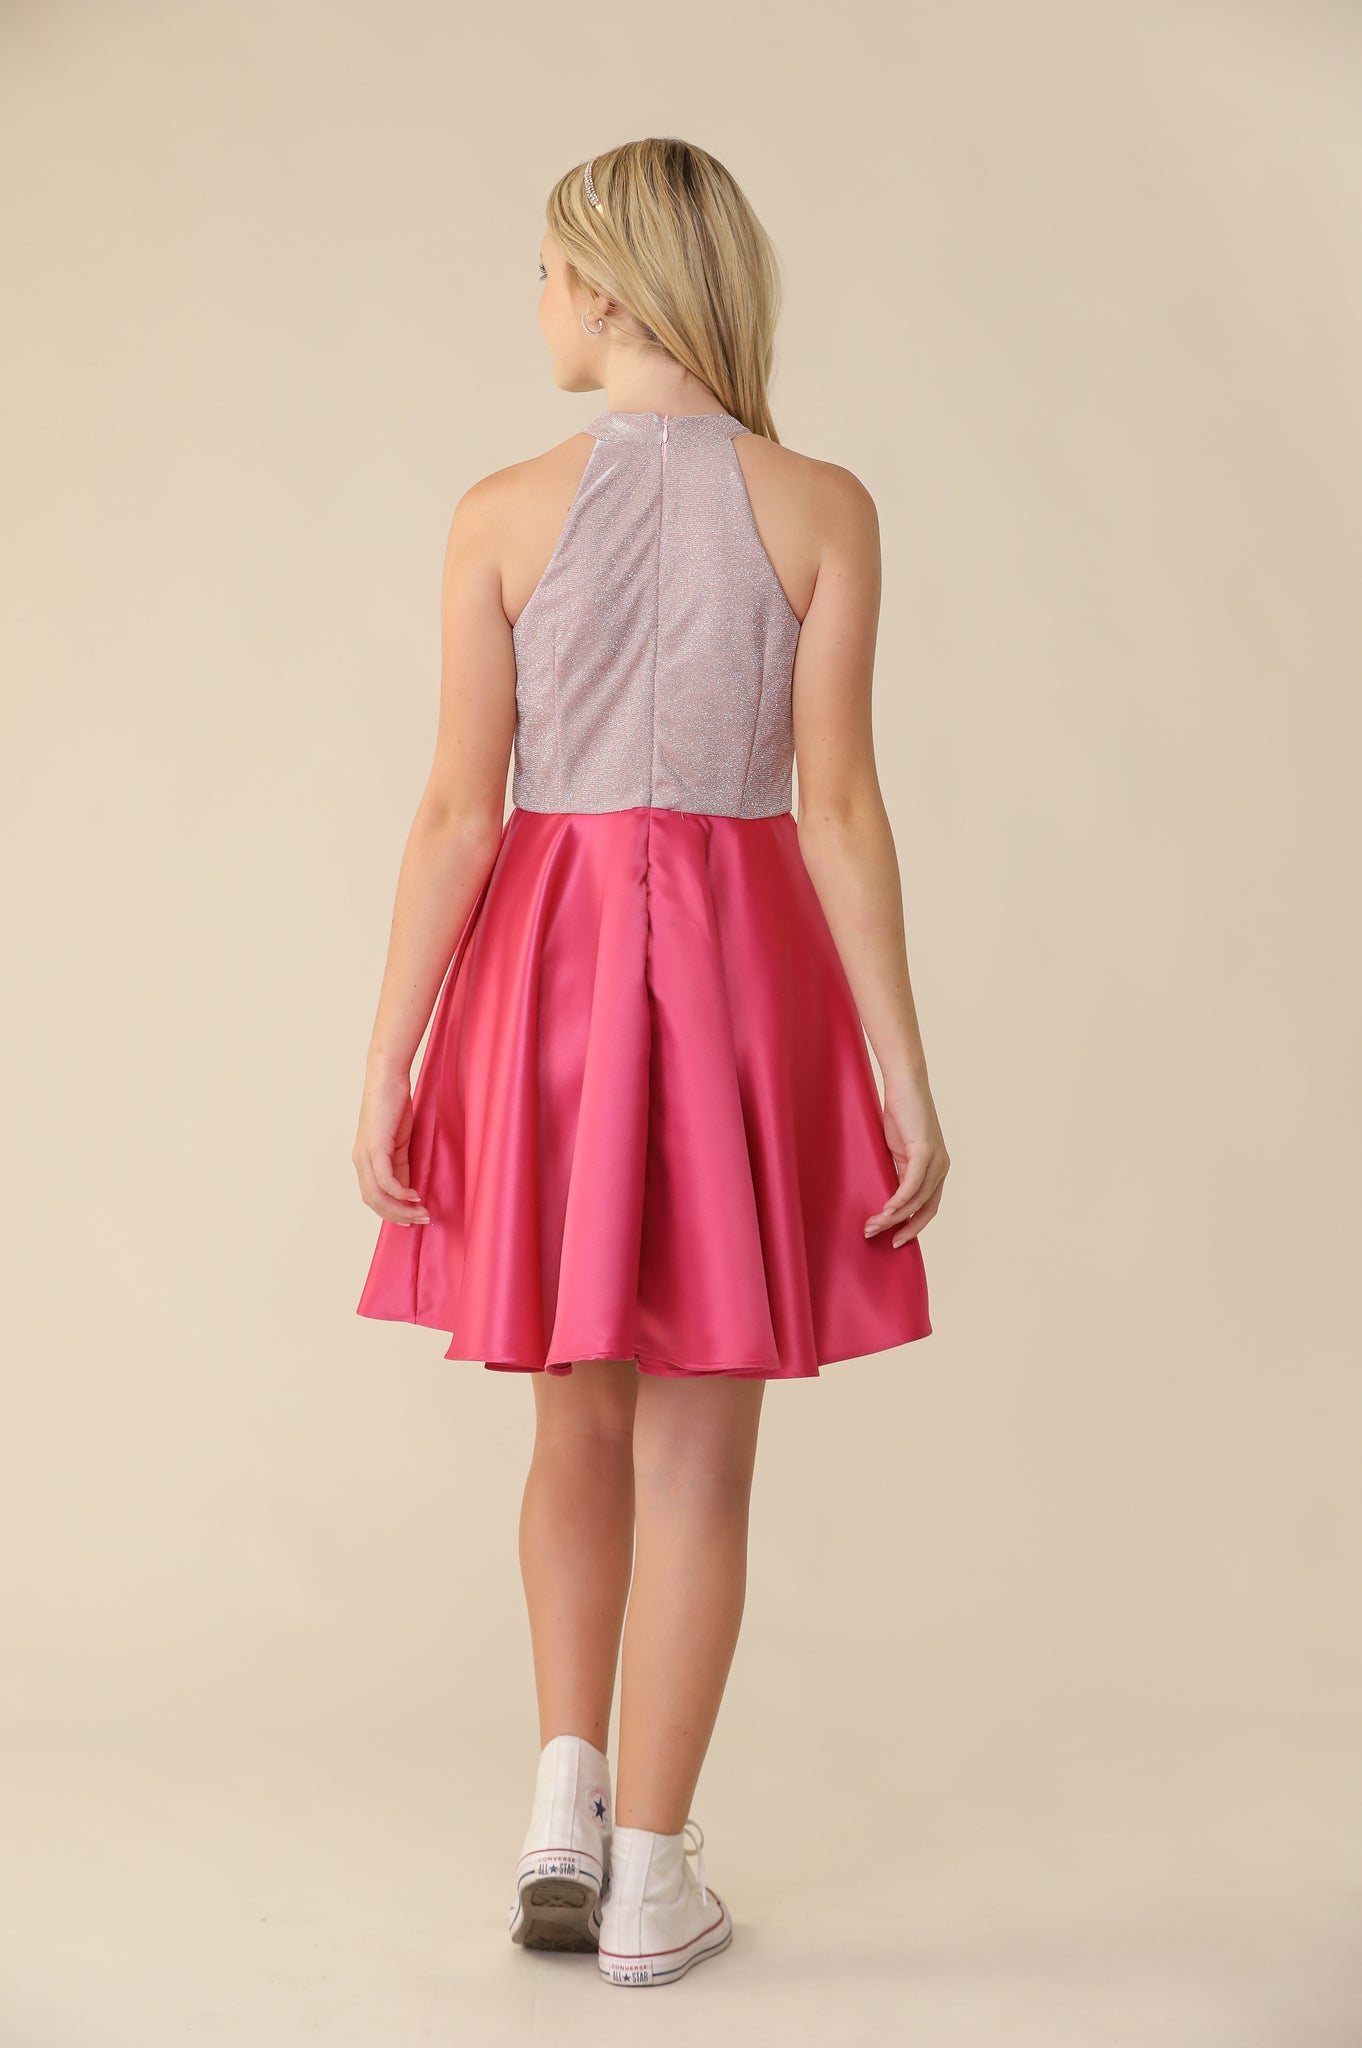 Halter style fit and flare dress with a stretchy, glitter bodice and non-stretch satin skirt in fuchsia pink back.